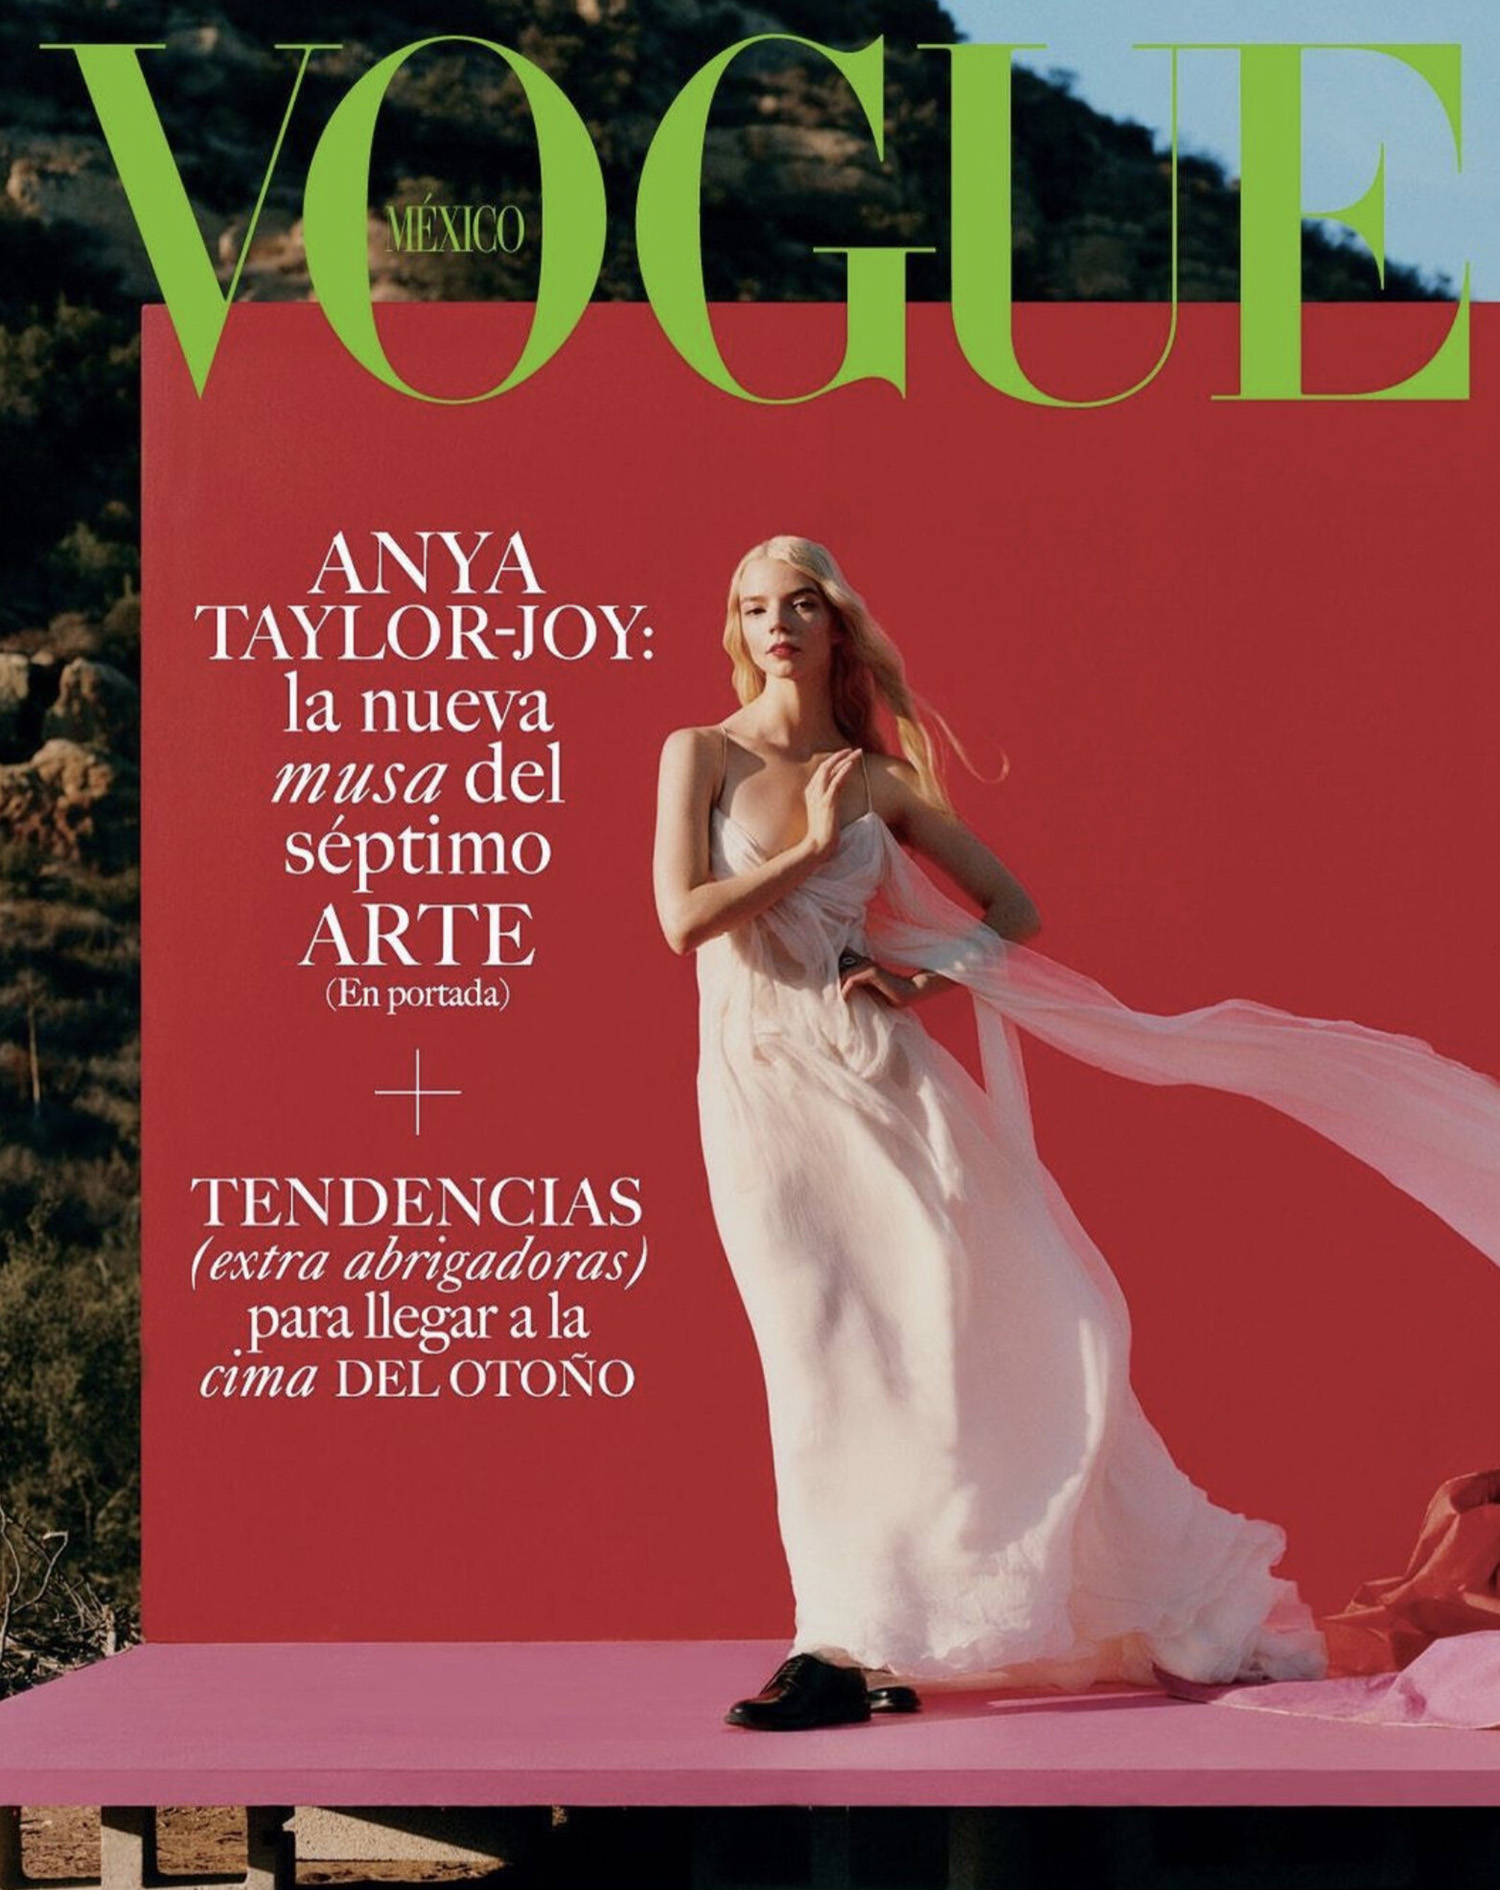 Anya Taylor-Joy covers Vogue Spain, Vogue Mexico & Latin America October 2021 by Camila Falquez